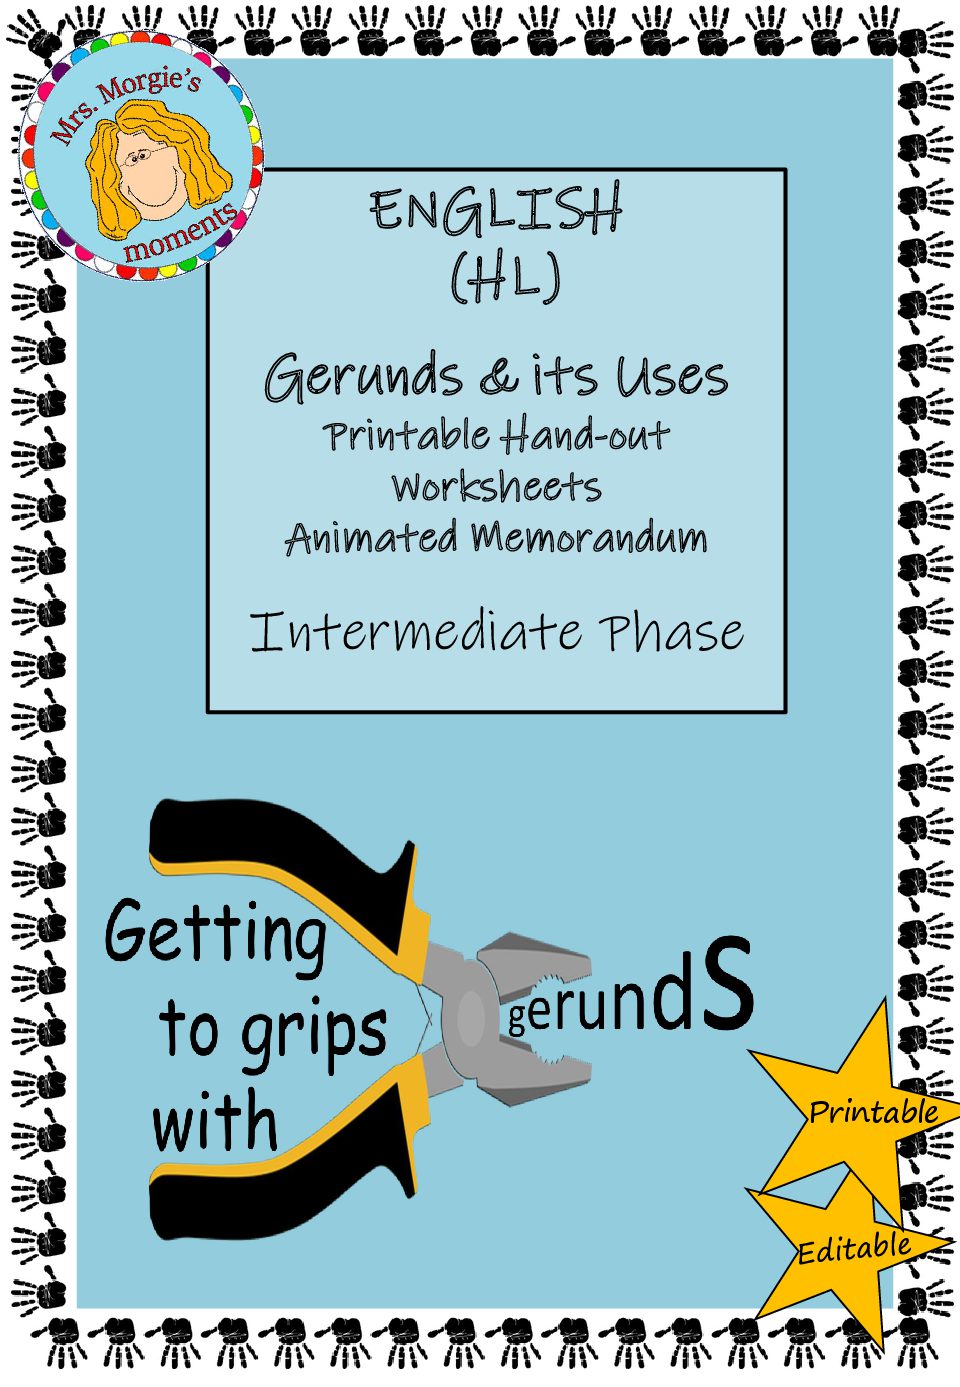 gerunds activities PPT cover 1